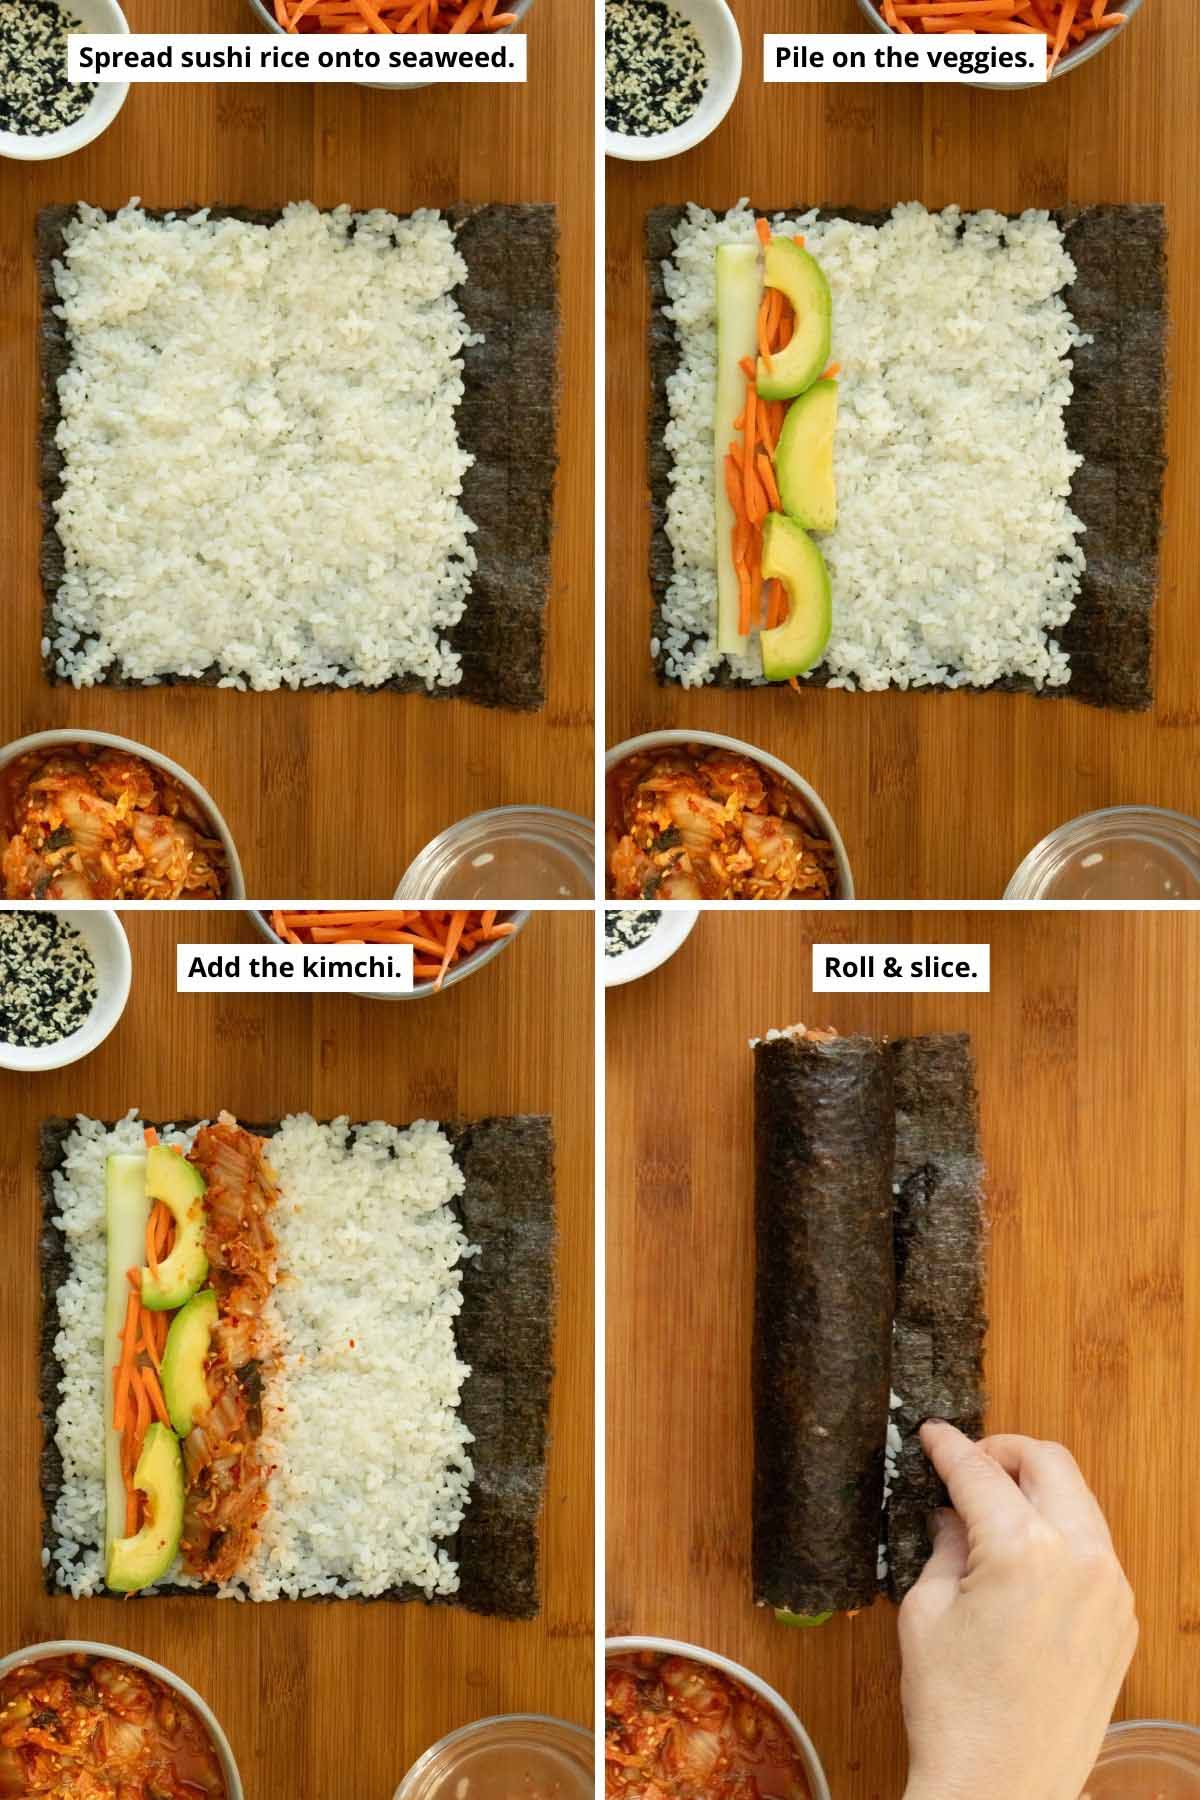 image collage showing the cooked sushi rice spread onto the nori sheet, adding the veggies, adding the kimchi, and rolling the sushi